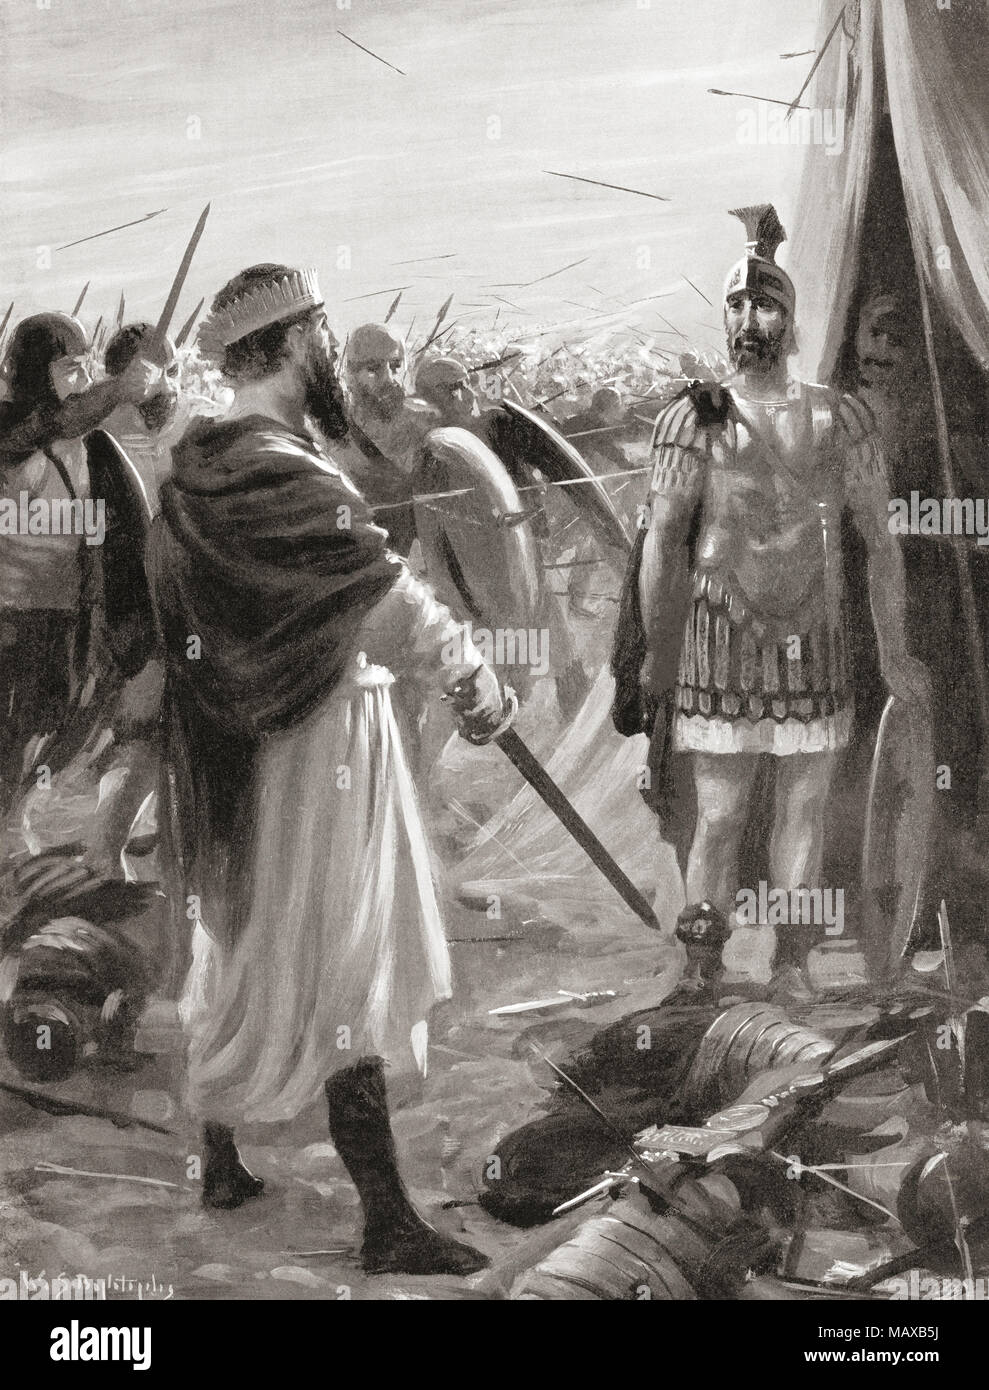 The capture of Valerian at the Battle of Edessa in AD 260 by Shapur I. Shapur I, aka Shapur I the Great.  Second shahanshah (king of kings) of the Sasanian Empire.  Valerian, c.193/195/200 – 260/264, aka  Valerian the Elder.  Roman Emperor.  After a painting by W.S. Bagdatopoulus, (1888-1965).  From Hutchinson's History of the Nations, published 1915 Stock Photo